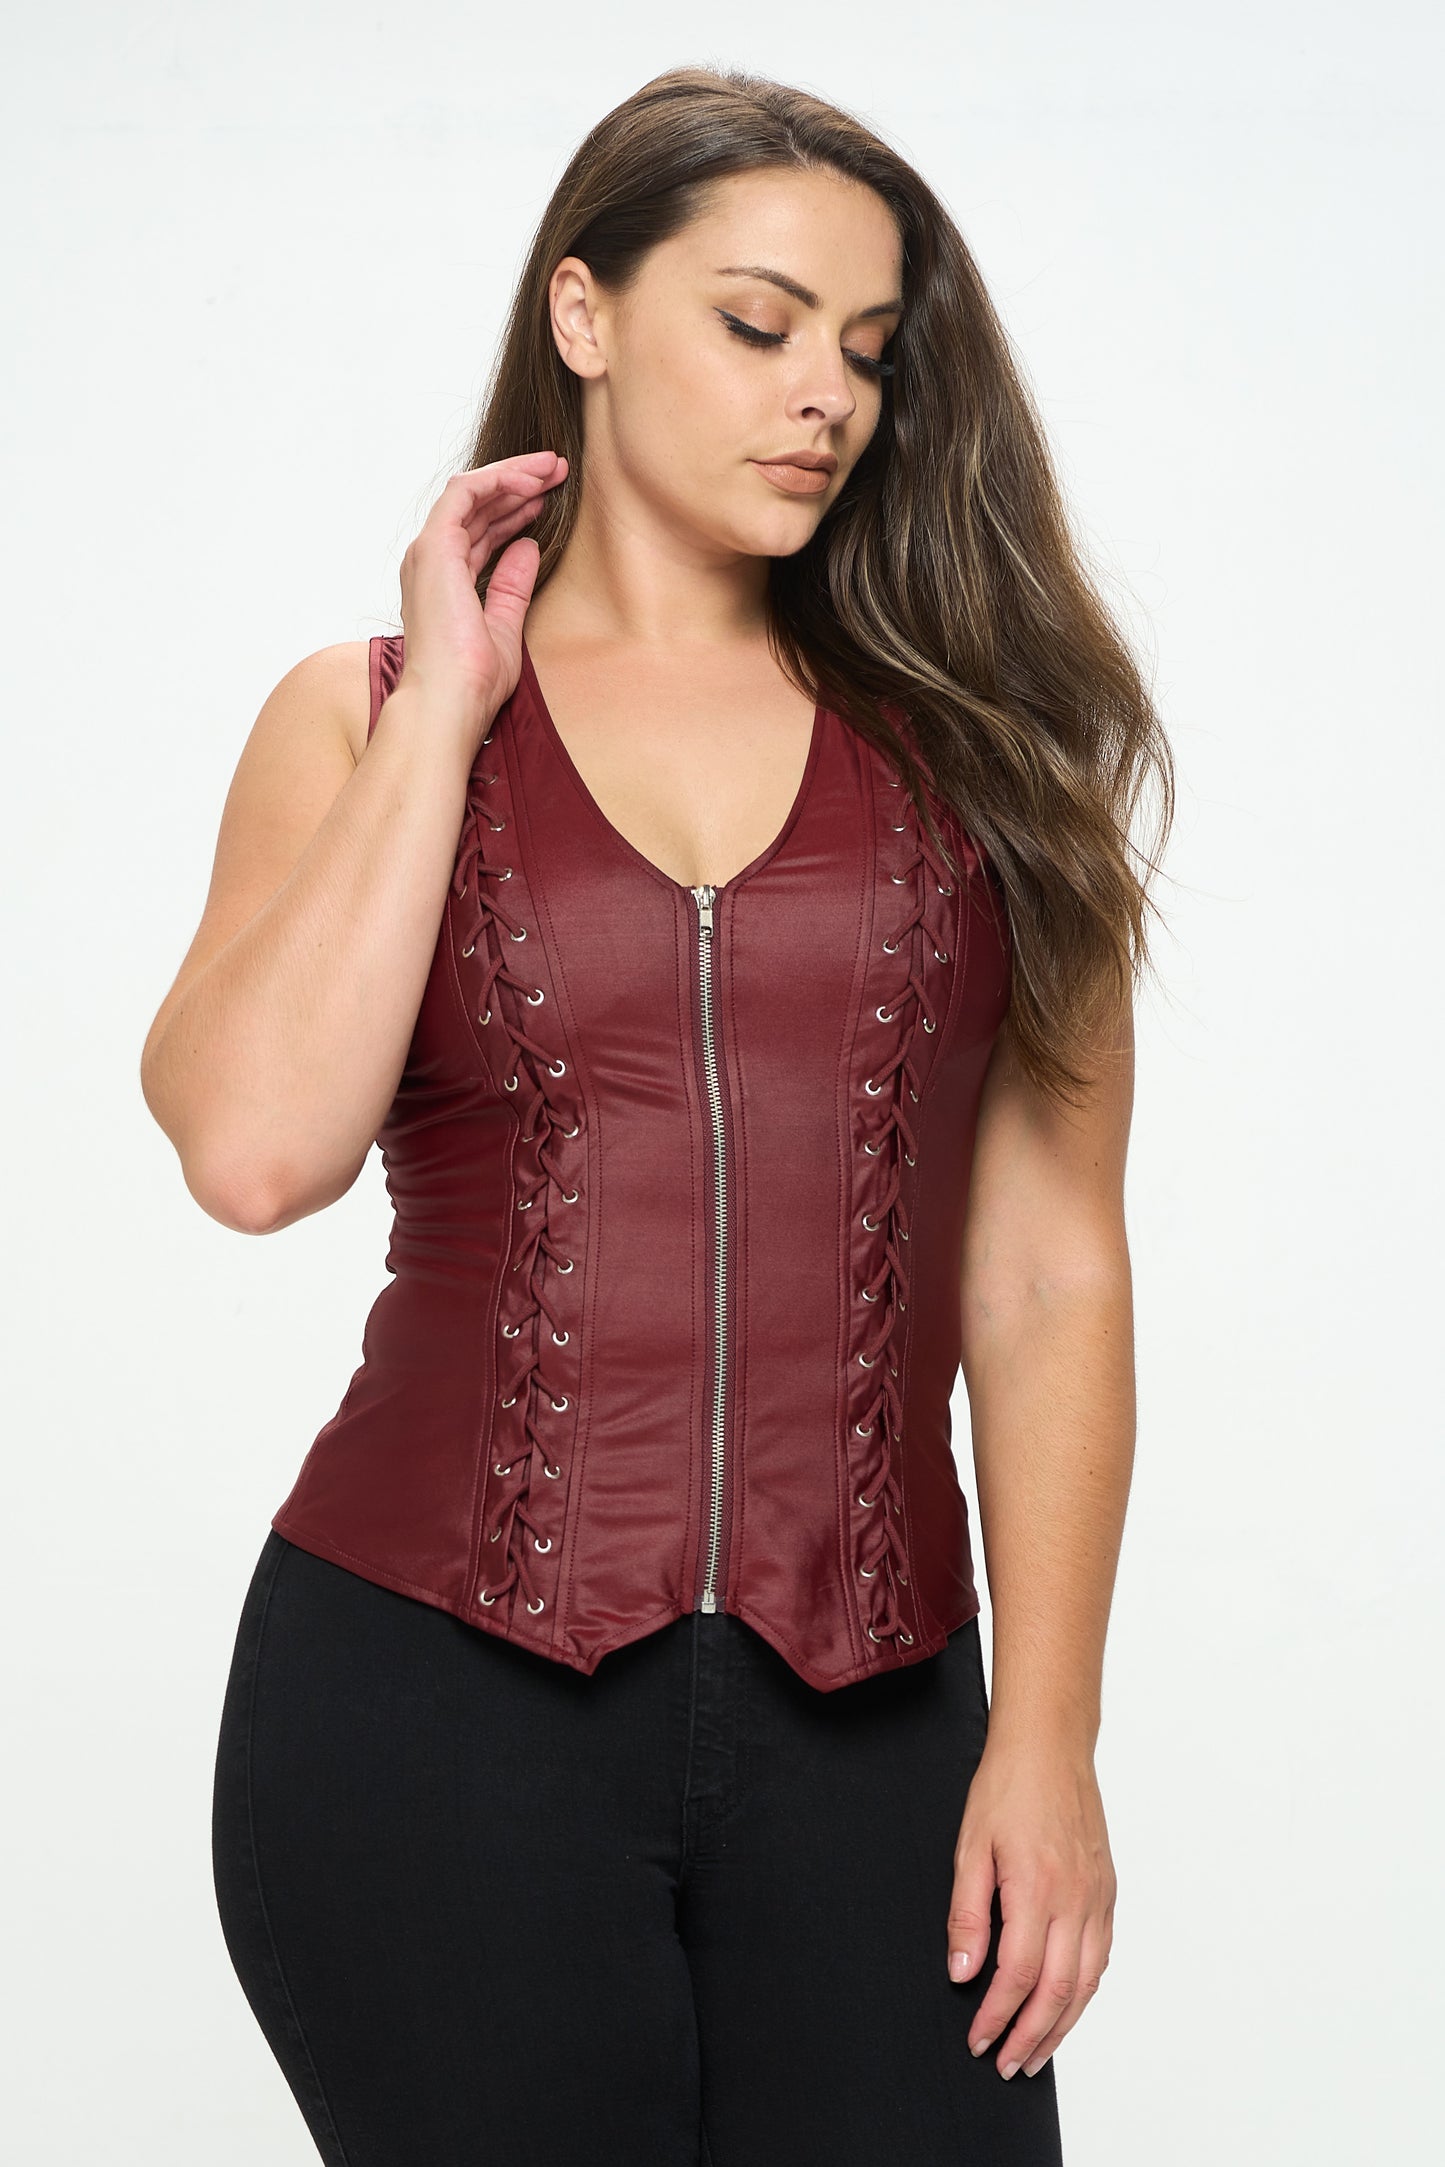 LACE-UP DETAIL ZIP UP SLEEVELESS TOP -PLUS